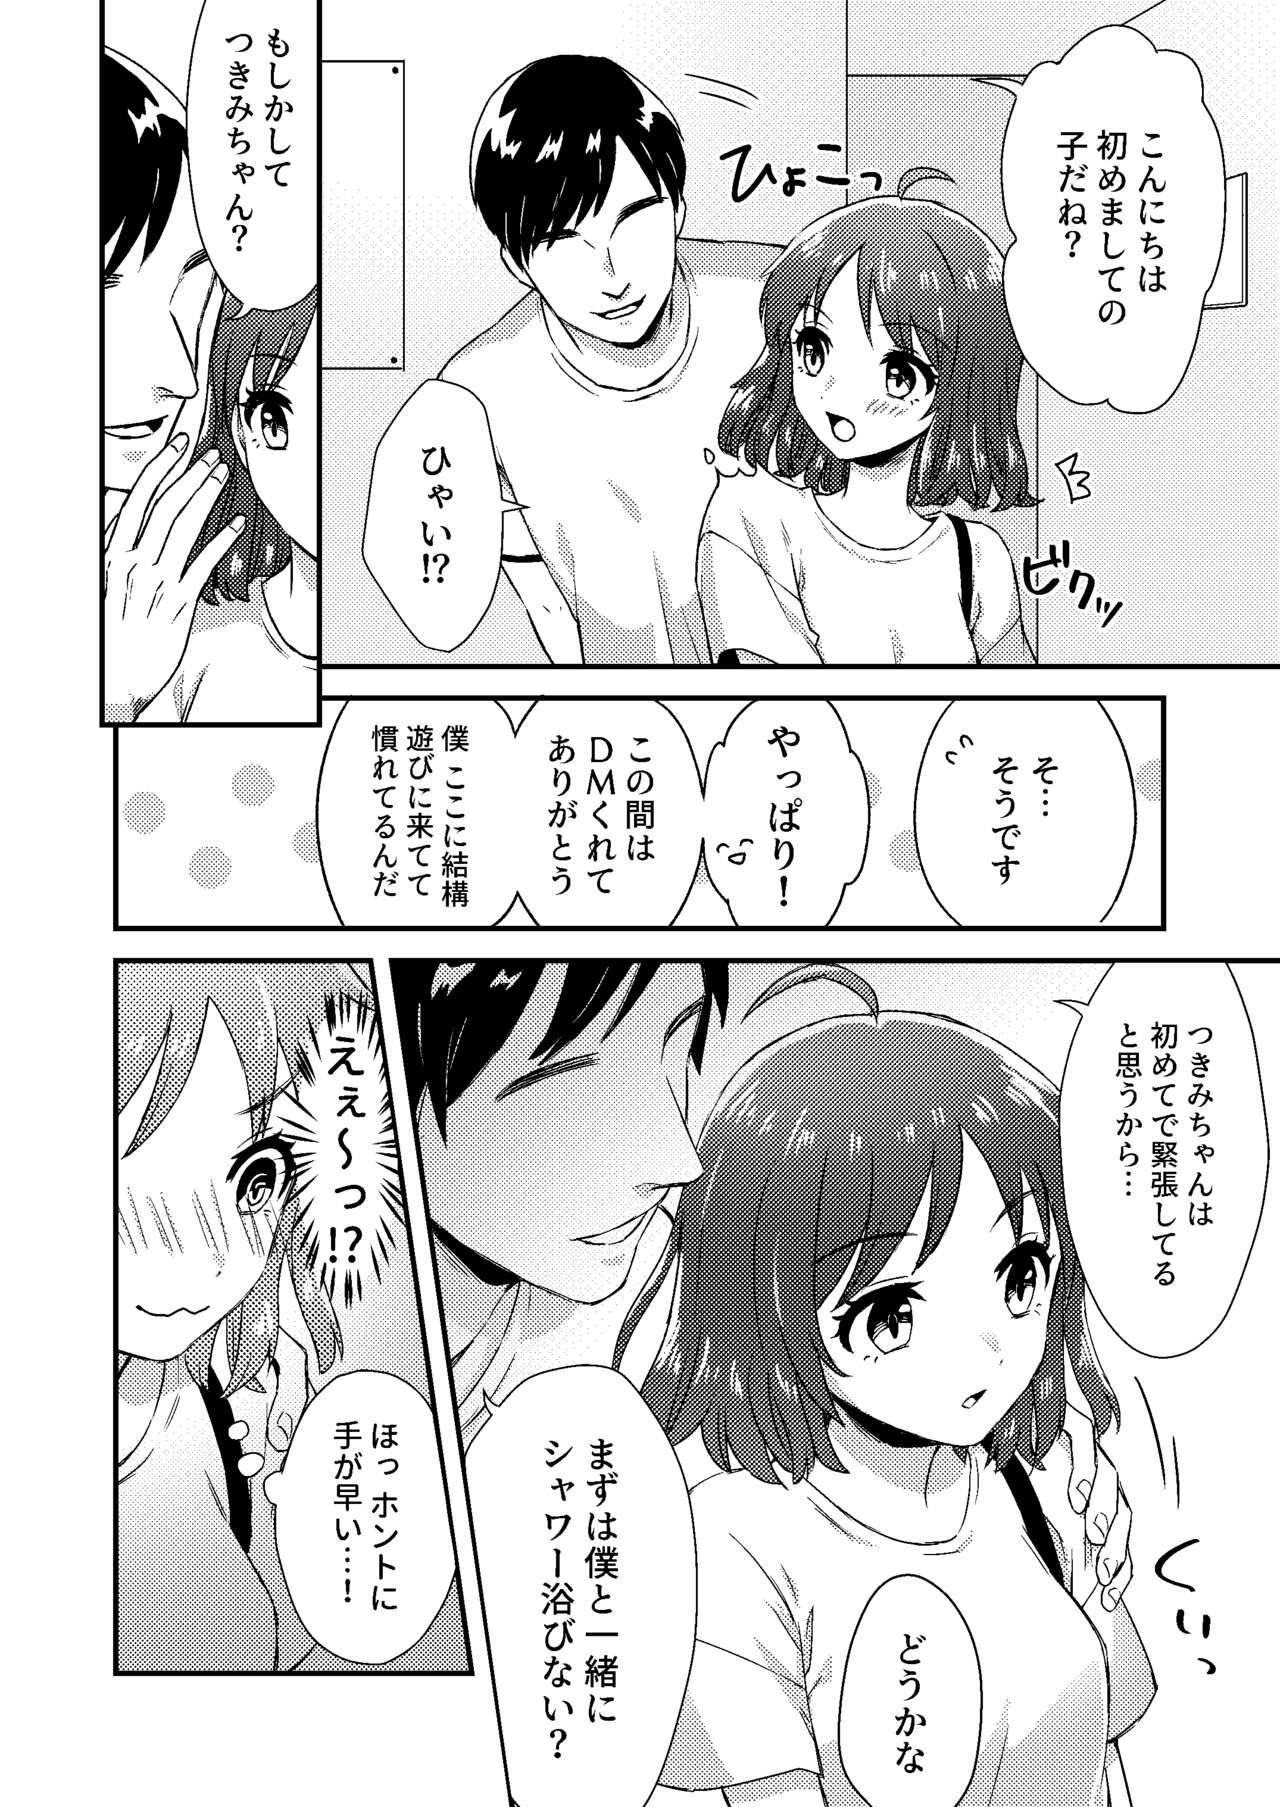 Relax にぷばー #1 つきみちゃんの場合 Footworship - Page 10